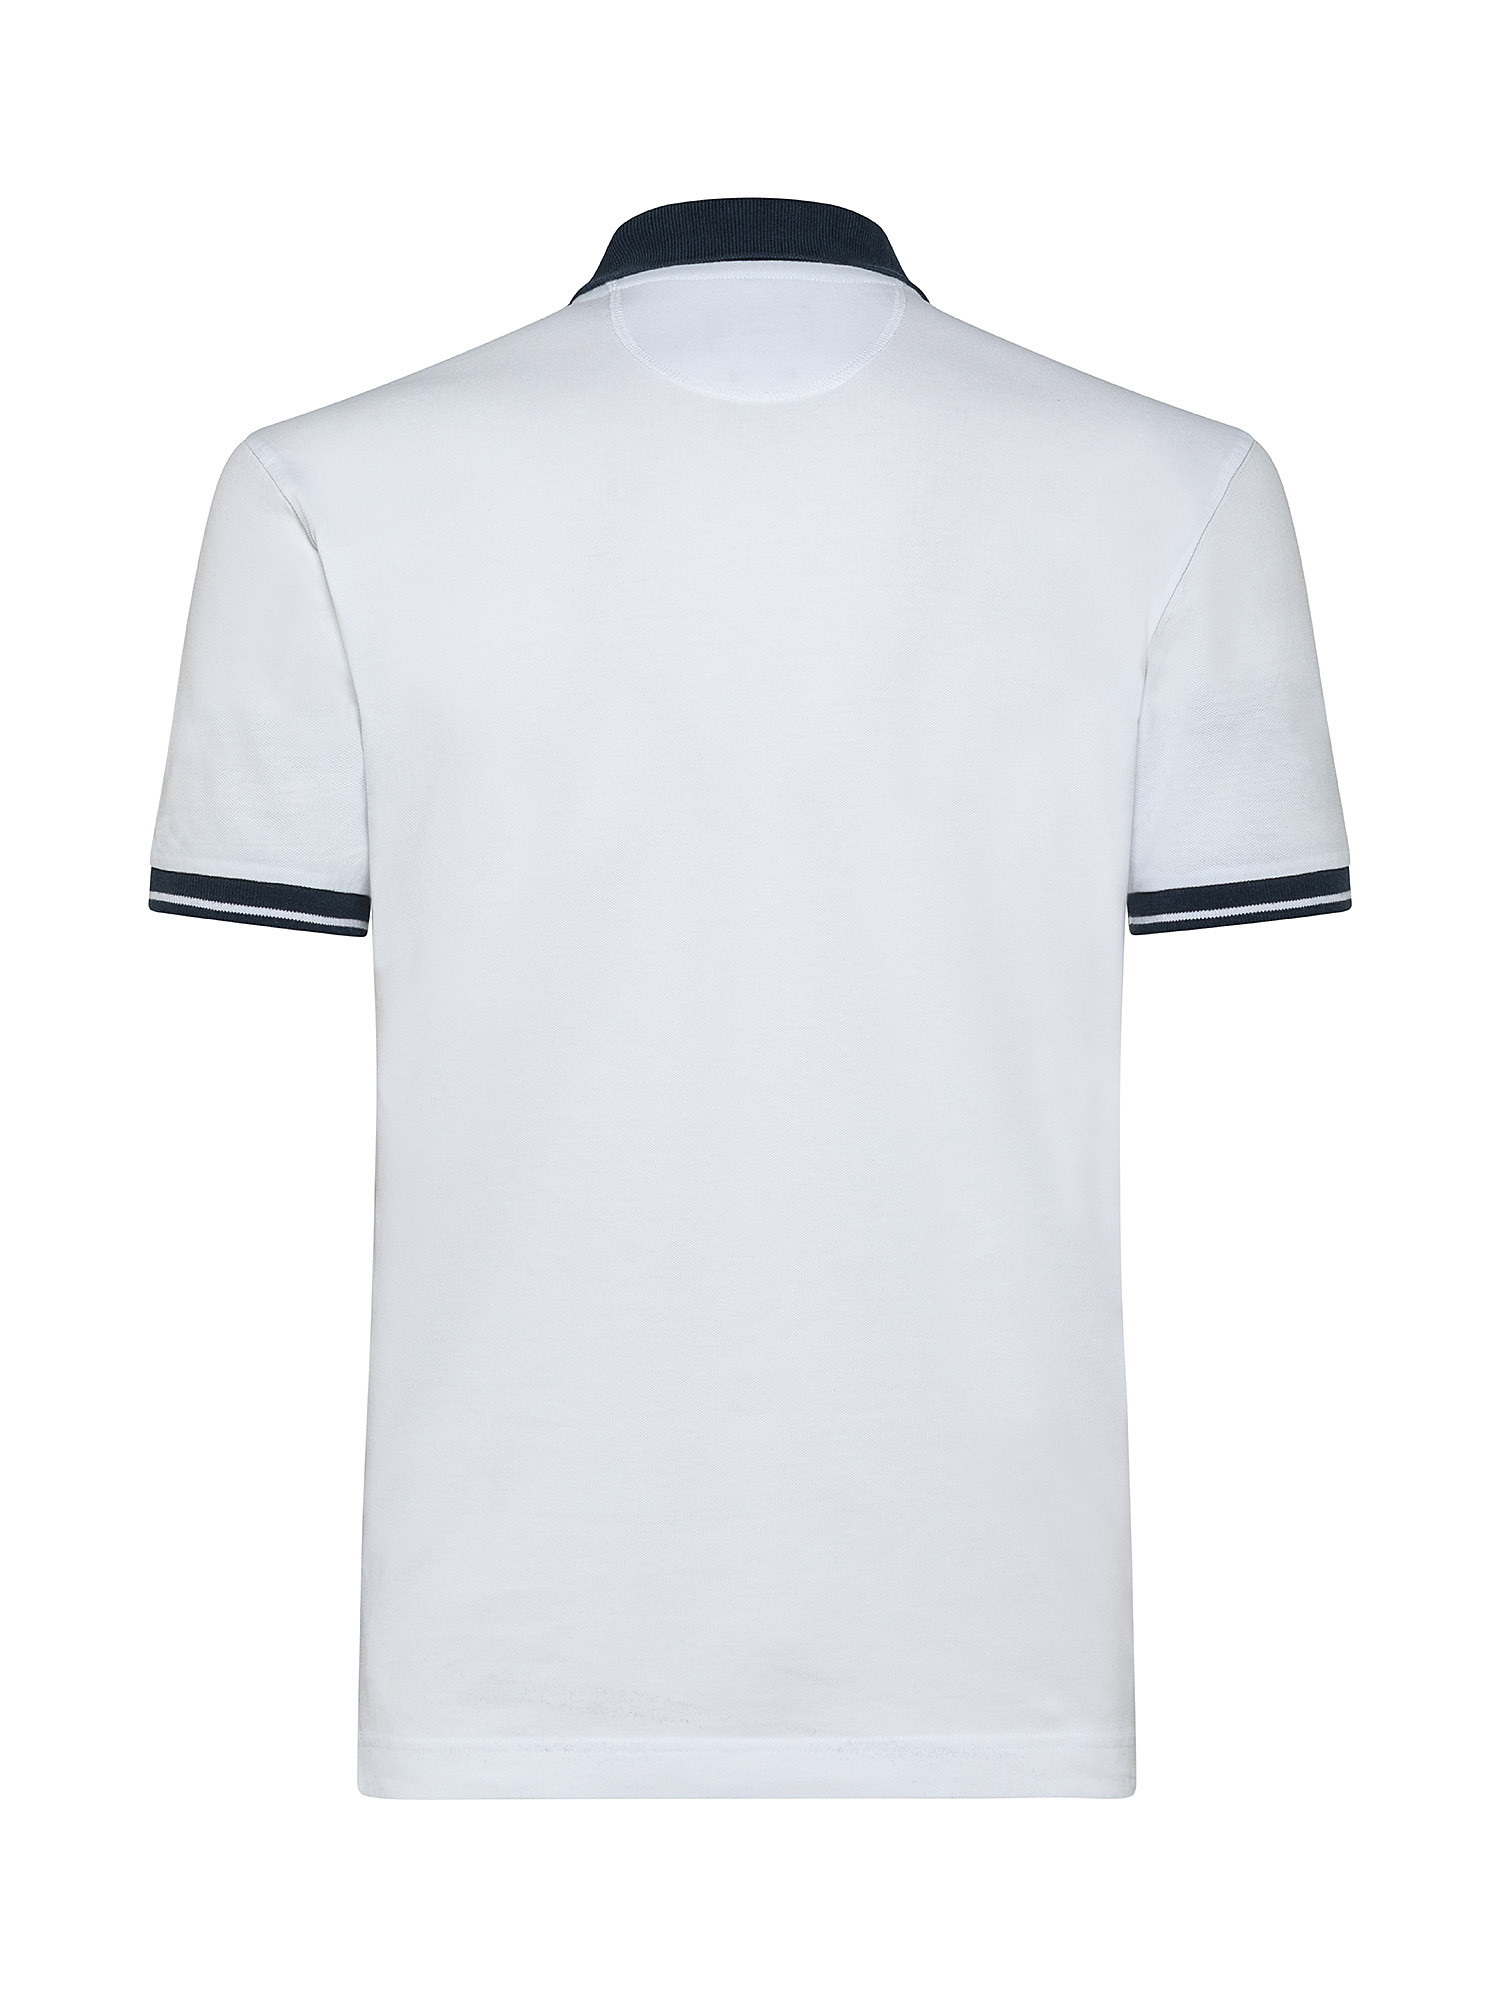 Men's short-sleeved slim-fit stretch cotton polo shirt, White, large image number 1